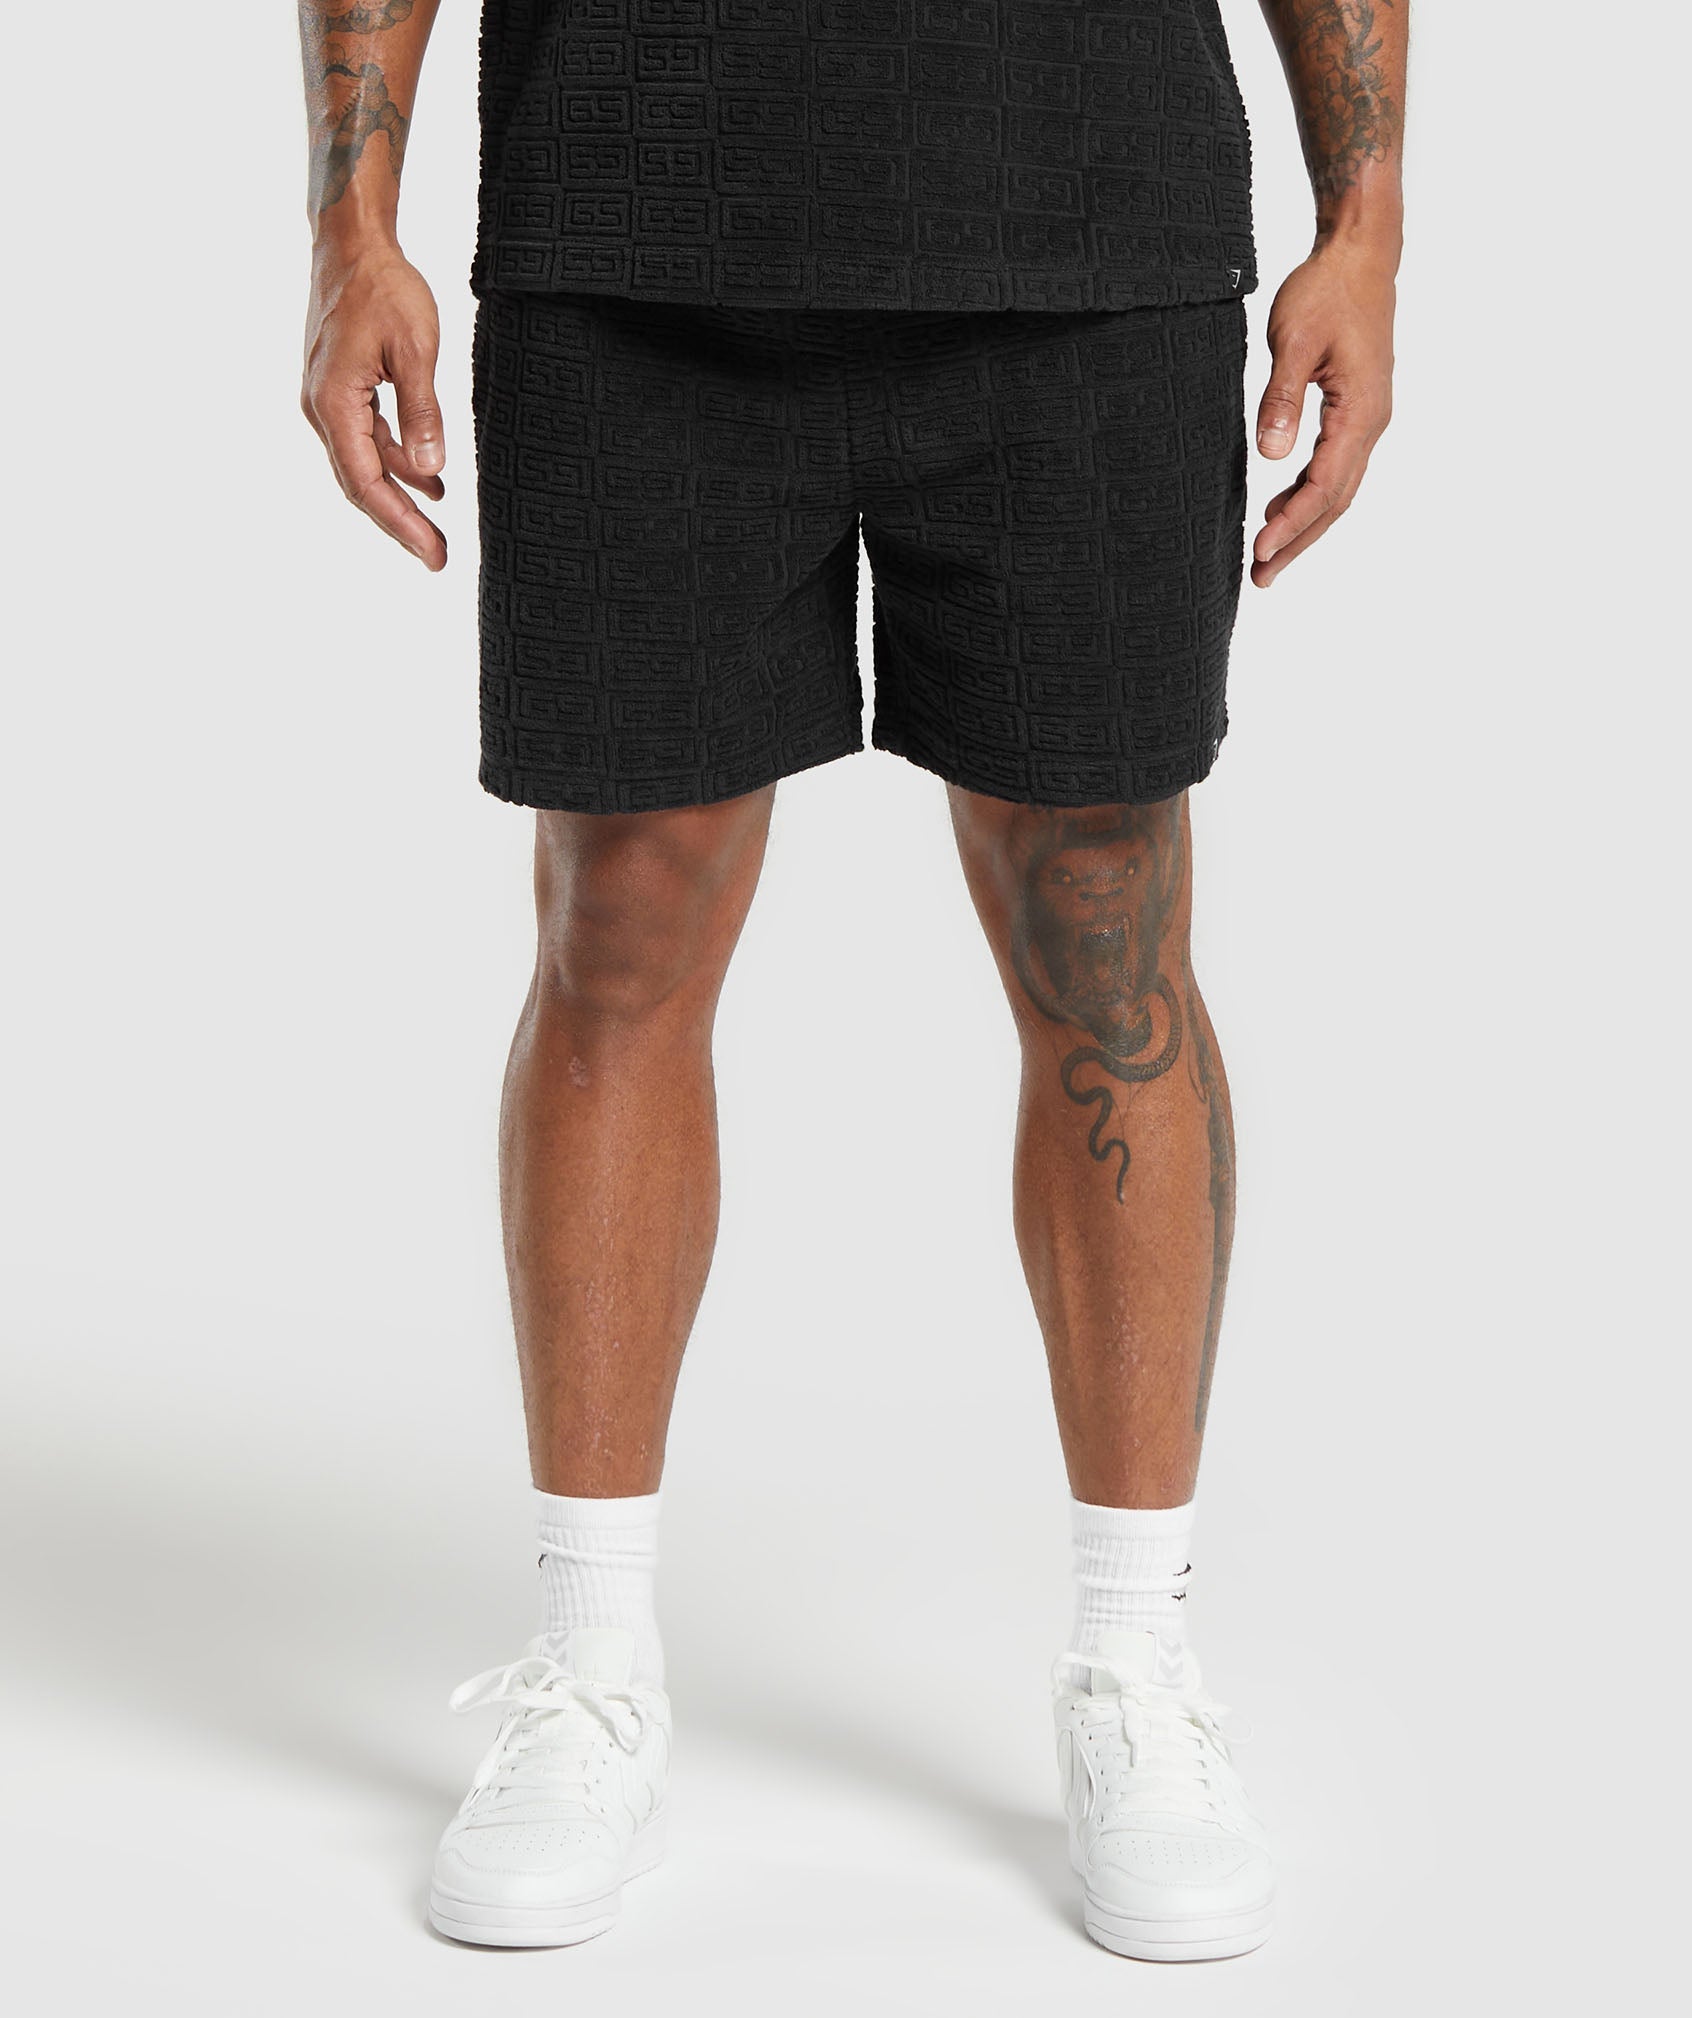 Towelling 7" Shorts in Black